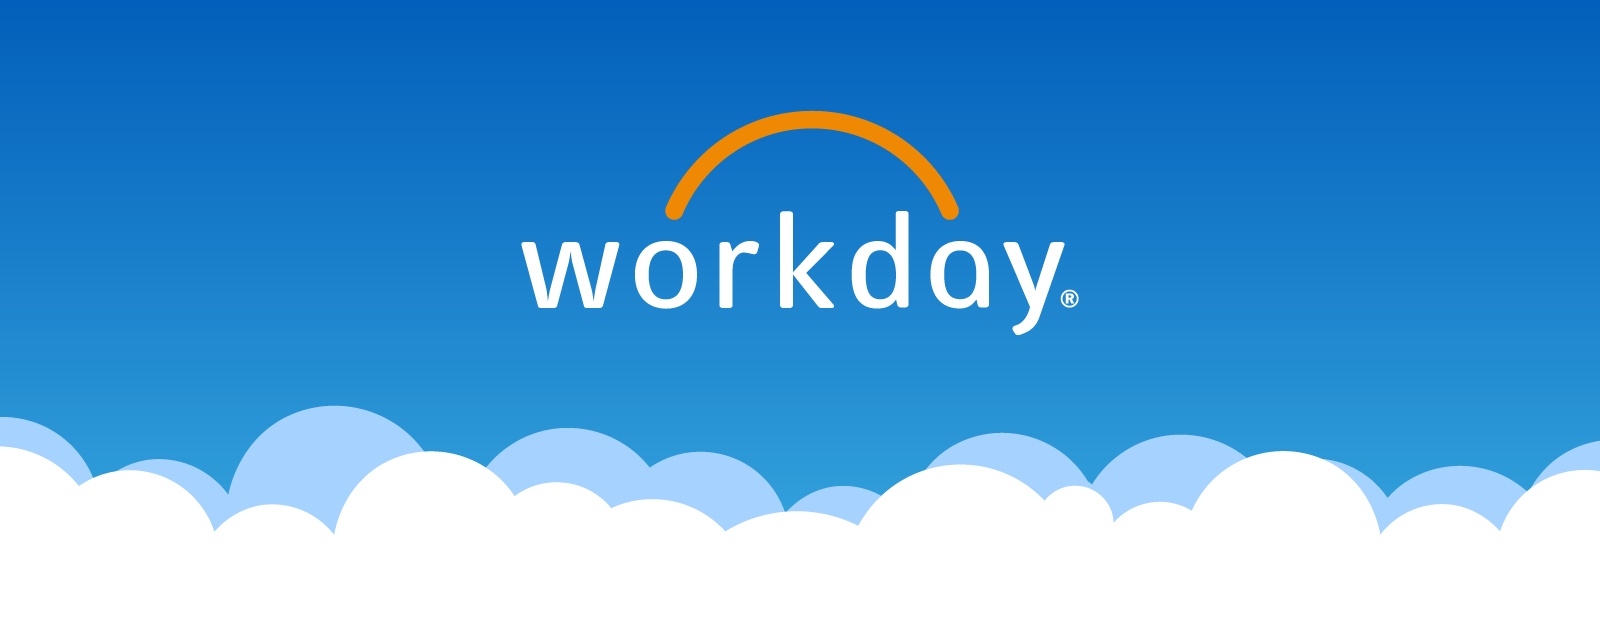 Strong earnings report drives Workday shares to a record high